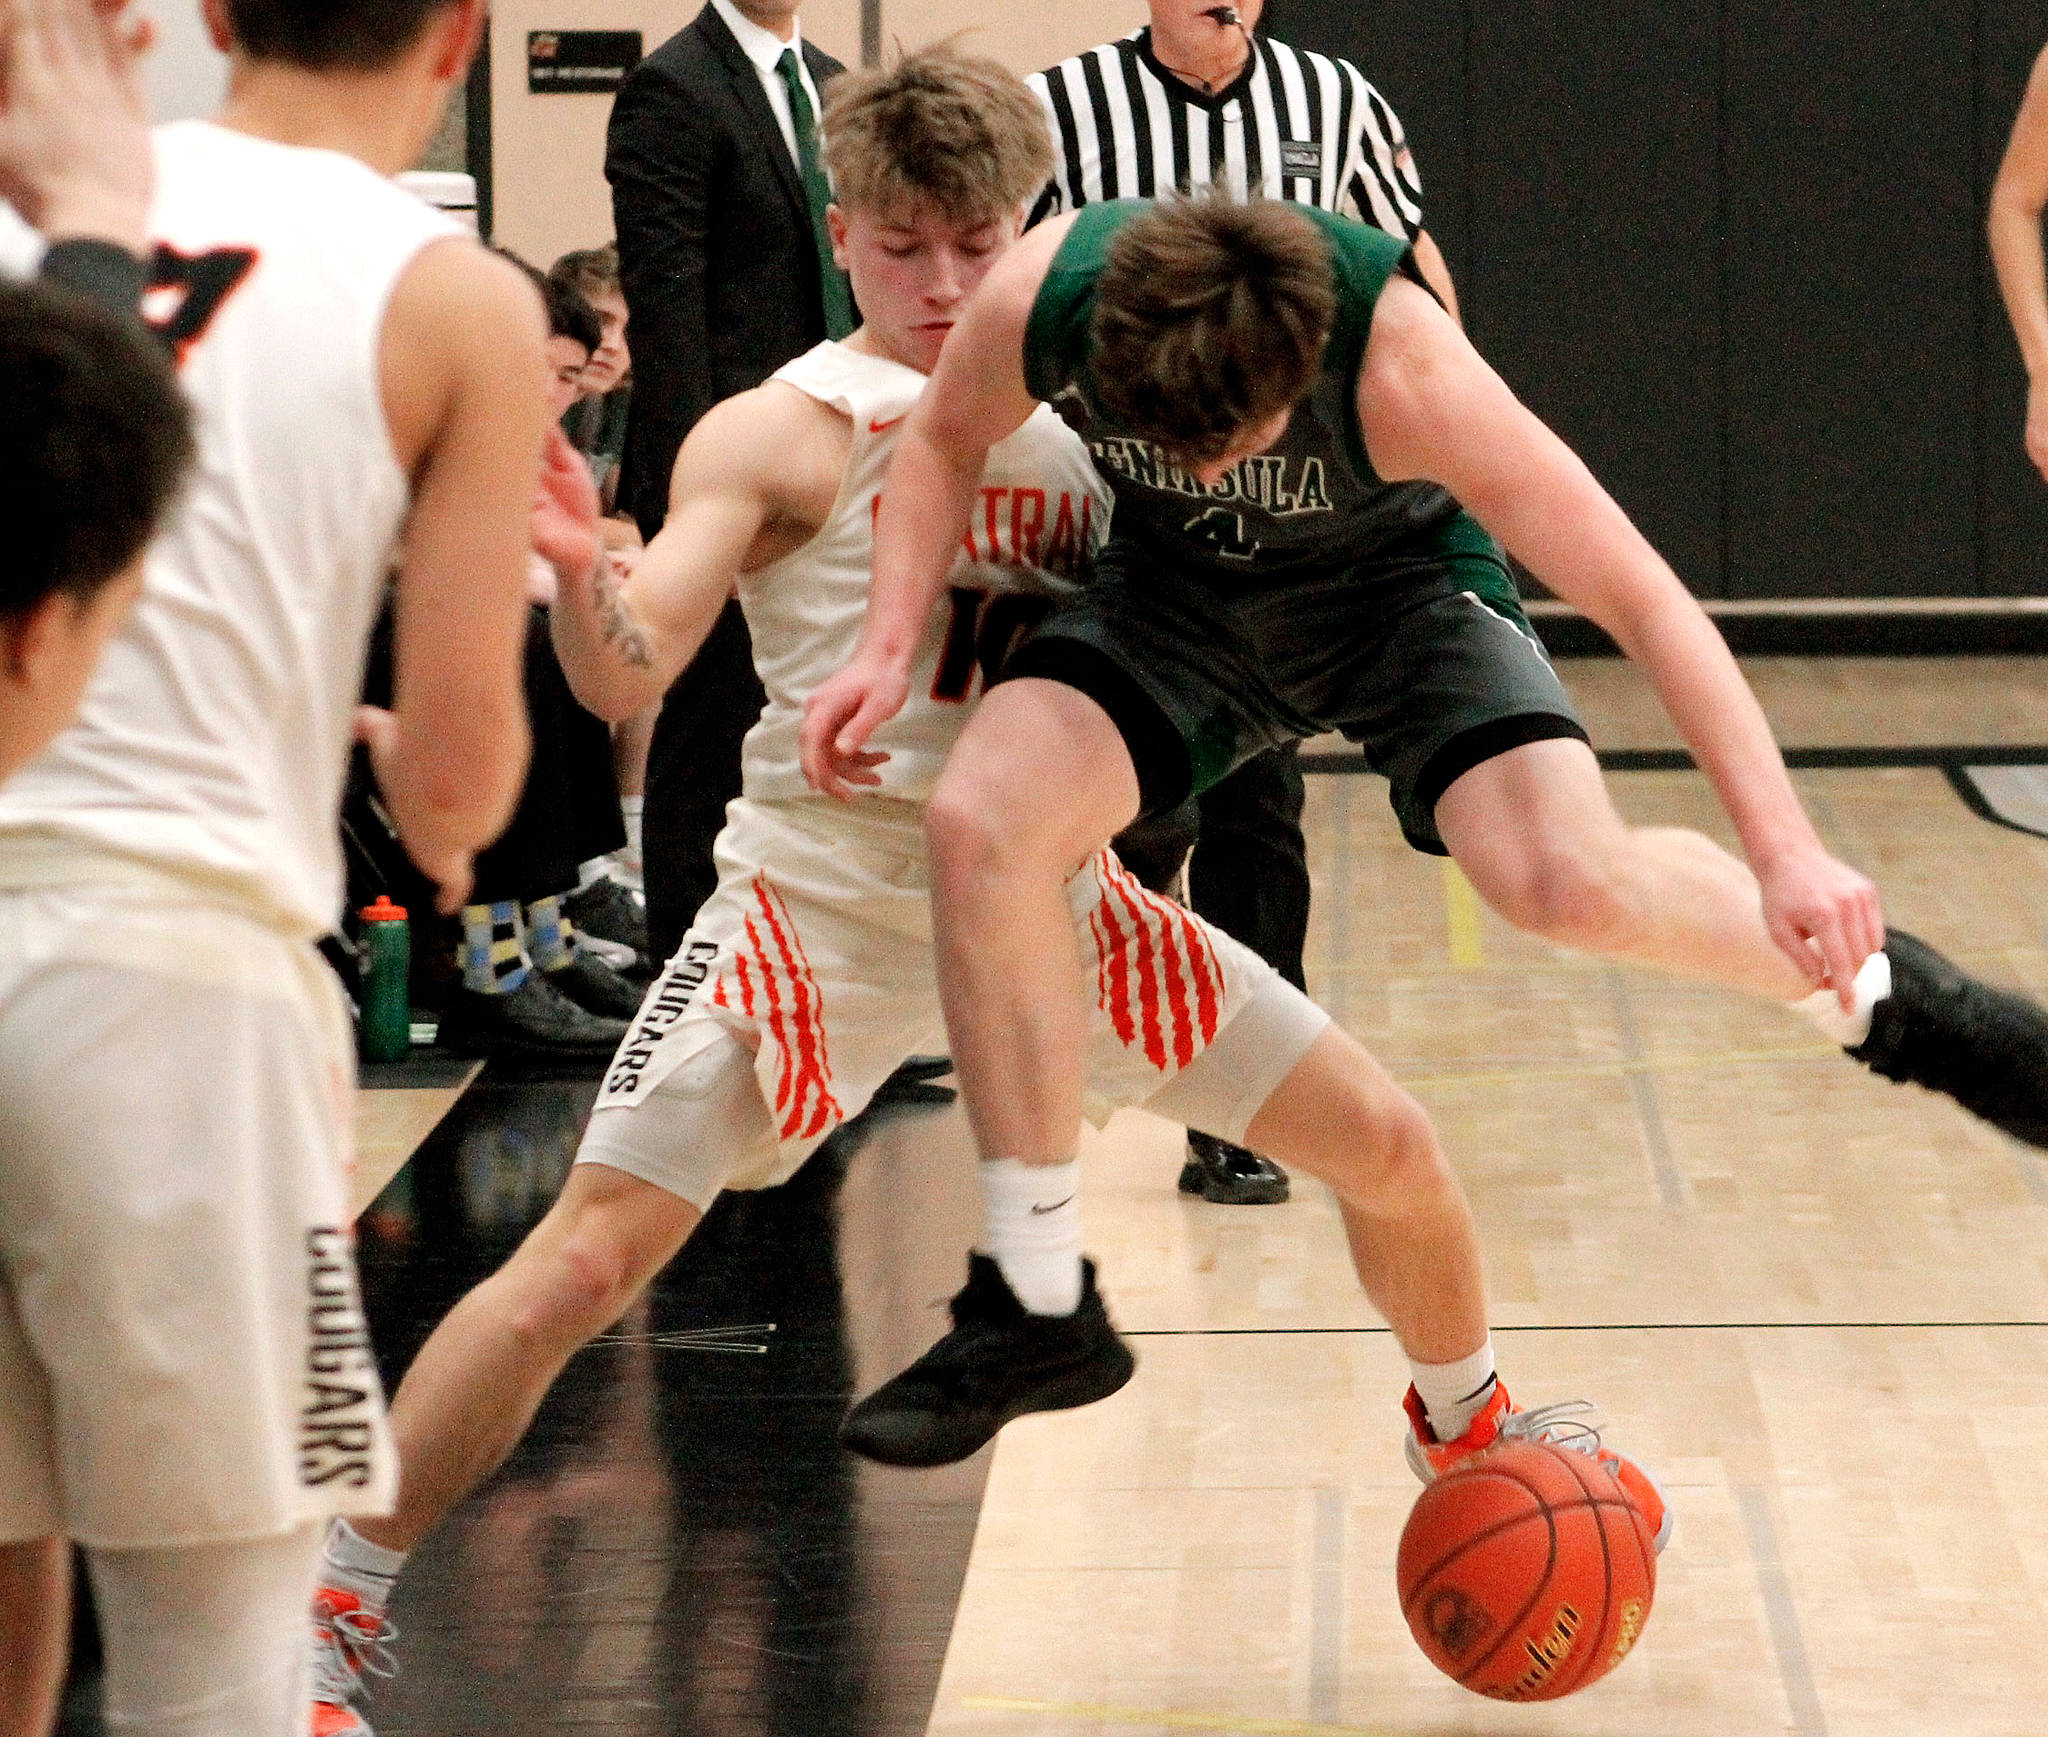 Peninsula’s Cole McVay and Central Kitsap’s Colby White battle for a loose ball in the first quarter of their district playoff game. (Mark Krulish/Kitsap News Group)